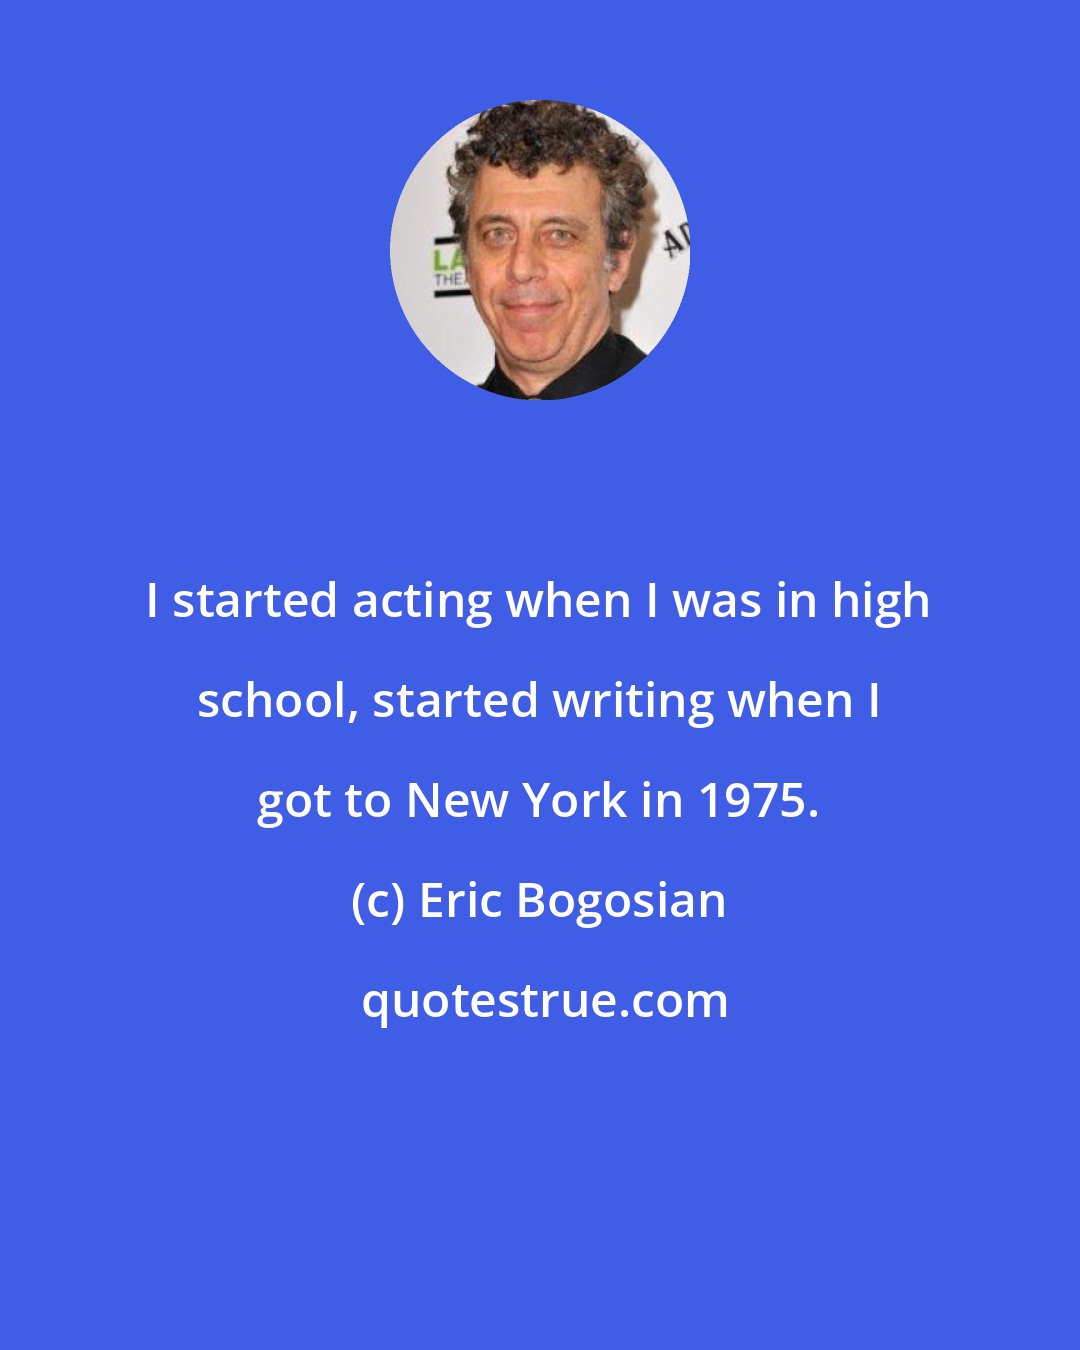 Eric Bogosian: I started acting when I was in high school, started writing when I got to New York in 1975.